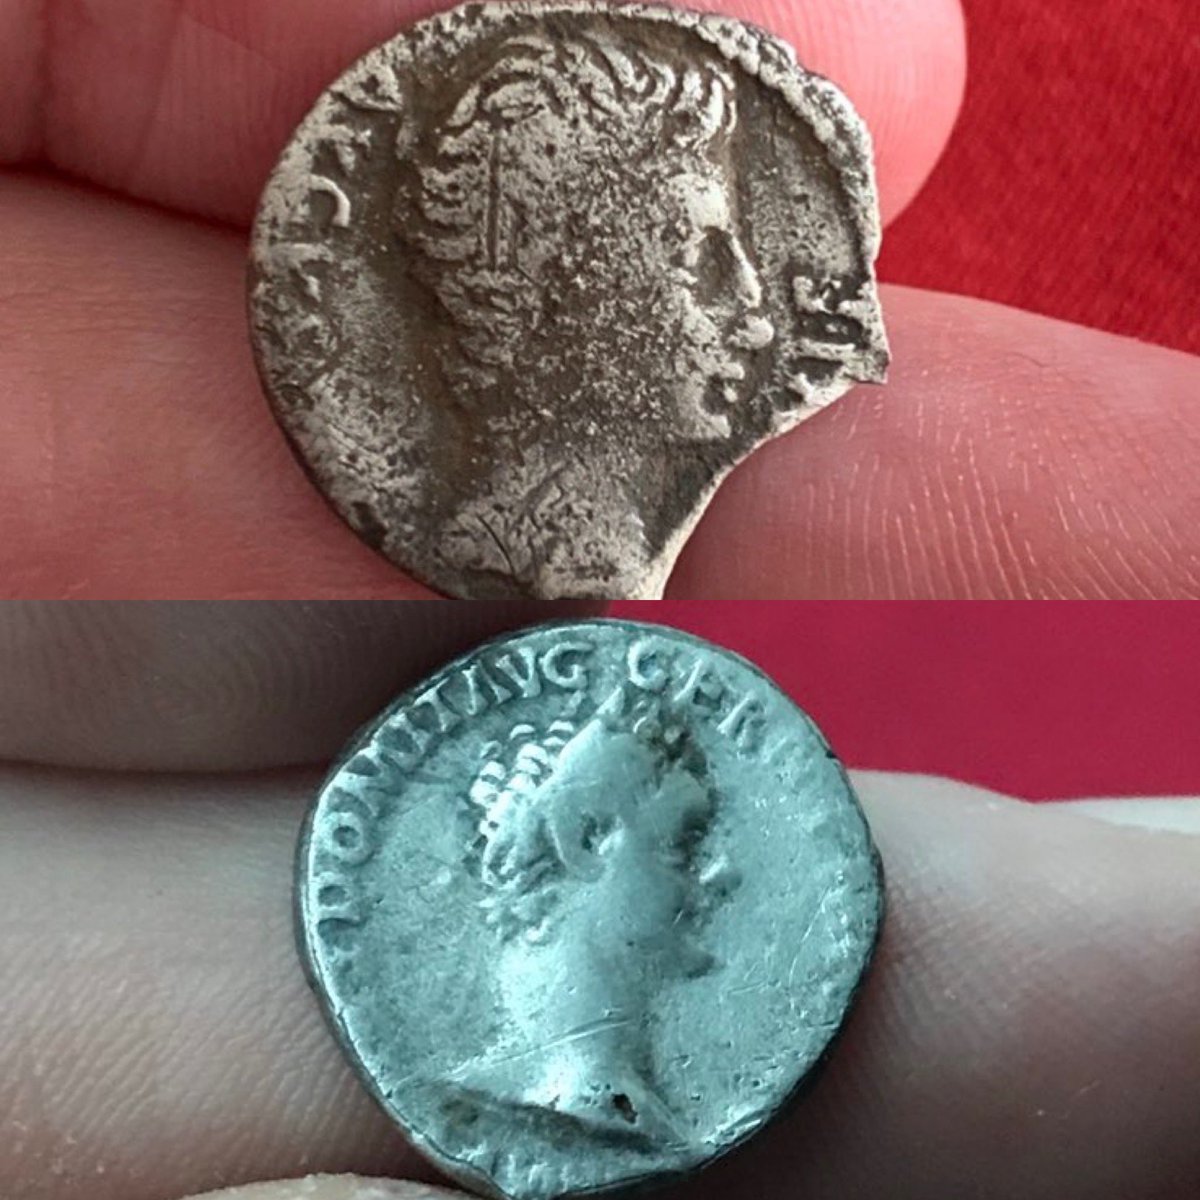 The 6 denarii in question. The oldest is top left. This one is a denarius of the Roman Republic & it was minted in Rome in 138 bc!! On the right of it is one of my favourite finds. Although I try not to have favourites, this one is. It’s a legionary denarius of Mark Antony...